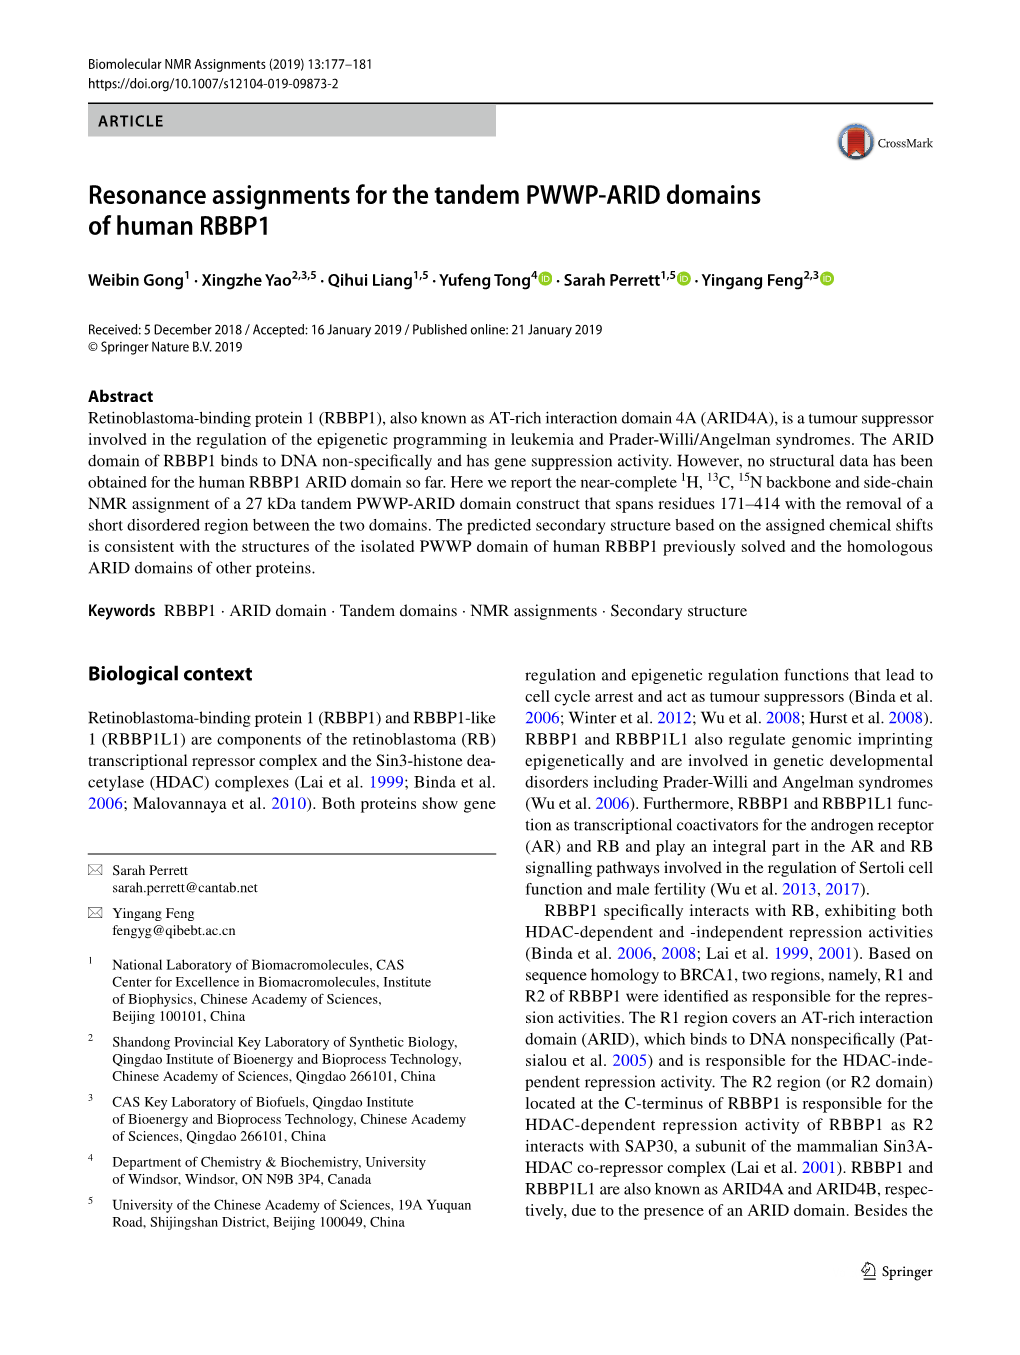 Resonance Assignments for the Tandem PWWP-ARID Domains of Human RBBP1